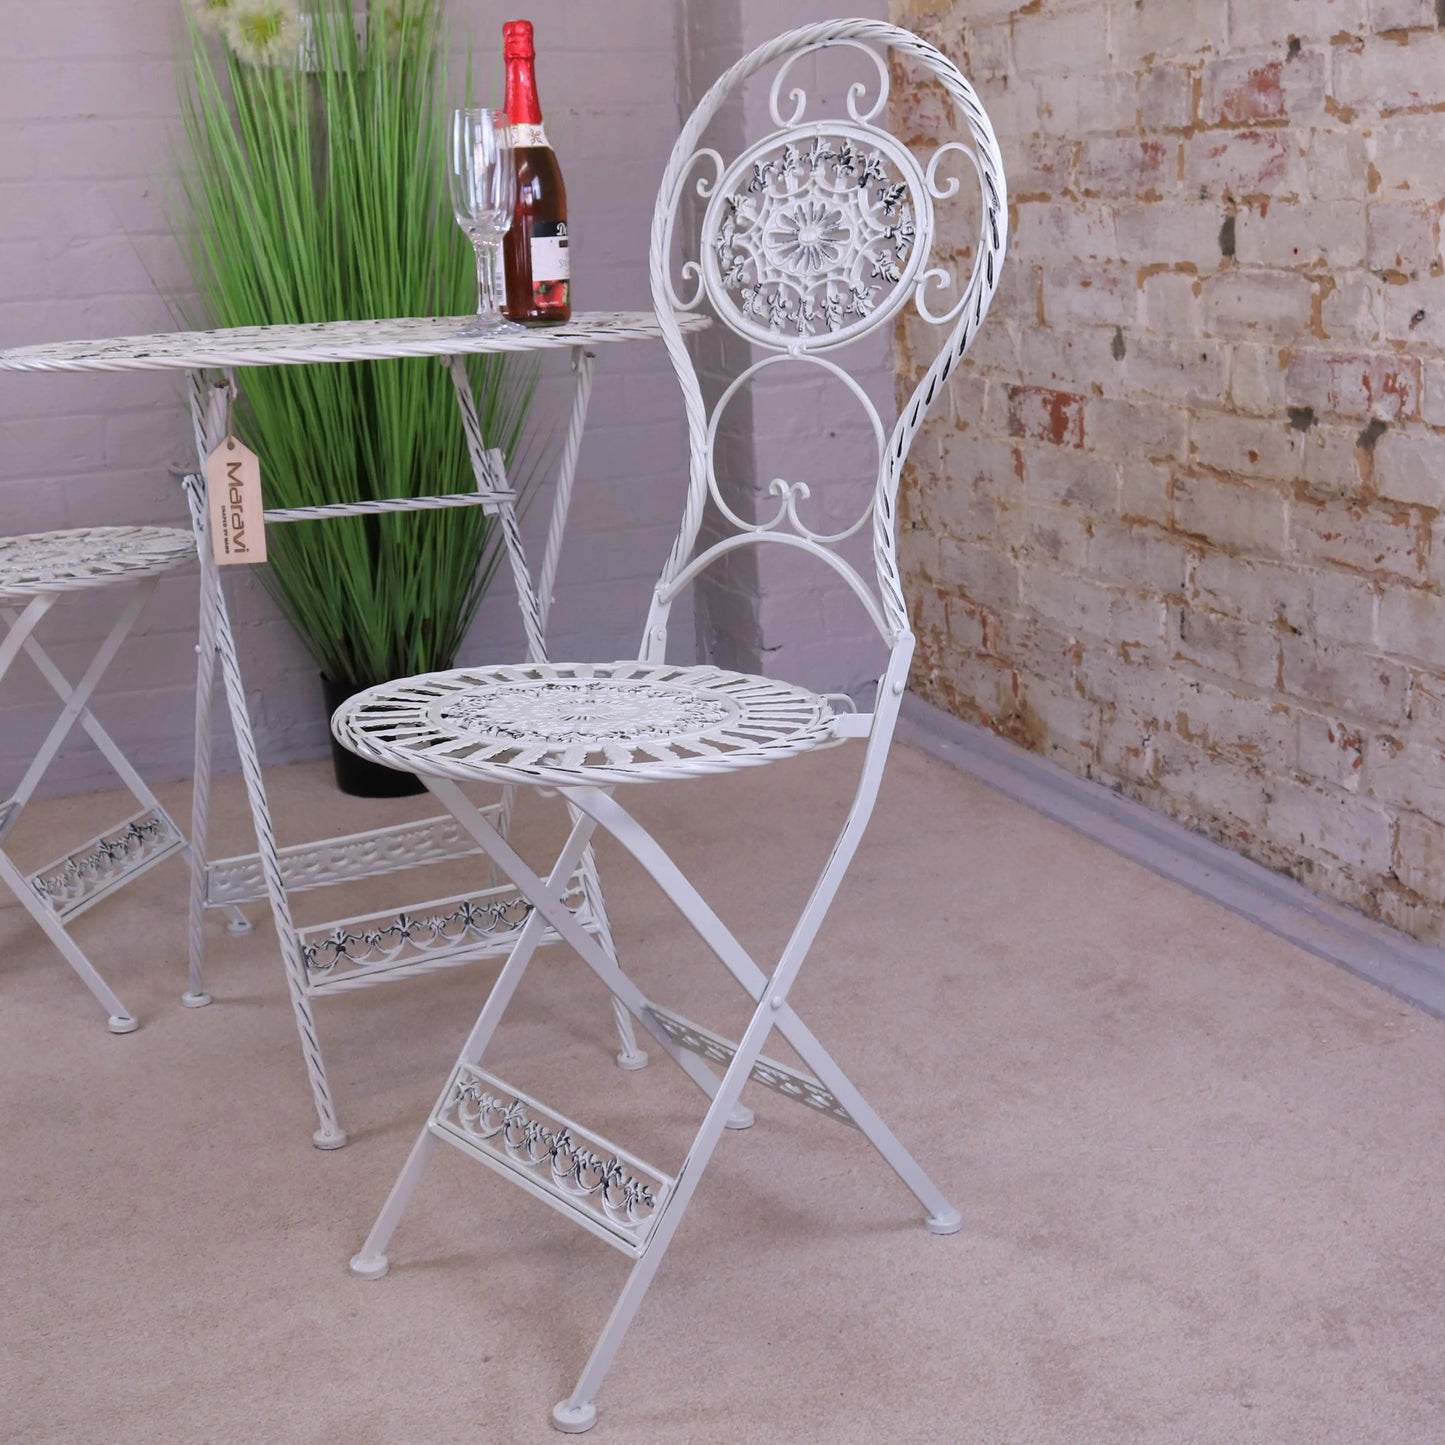 Odal 3 Piece Garden Table and Chairs Zoomed In View of Chair